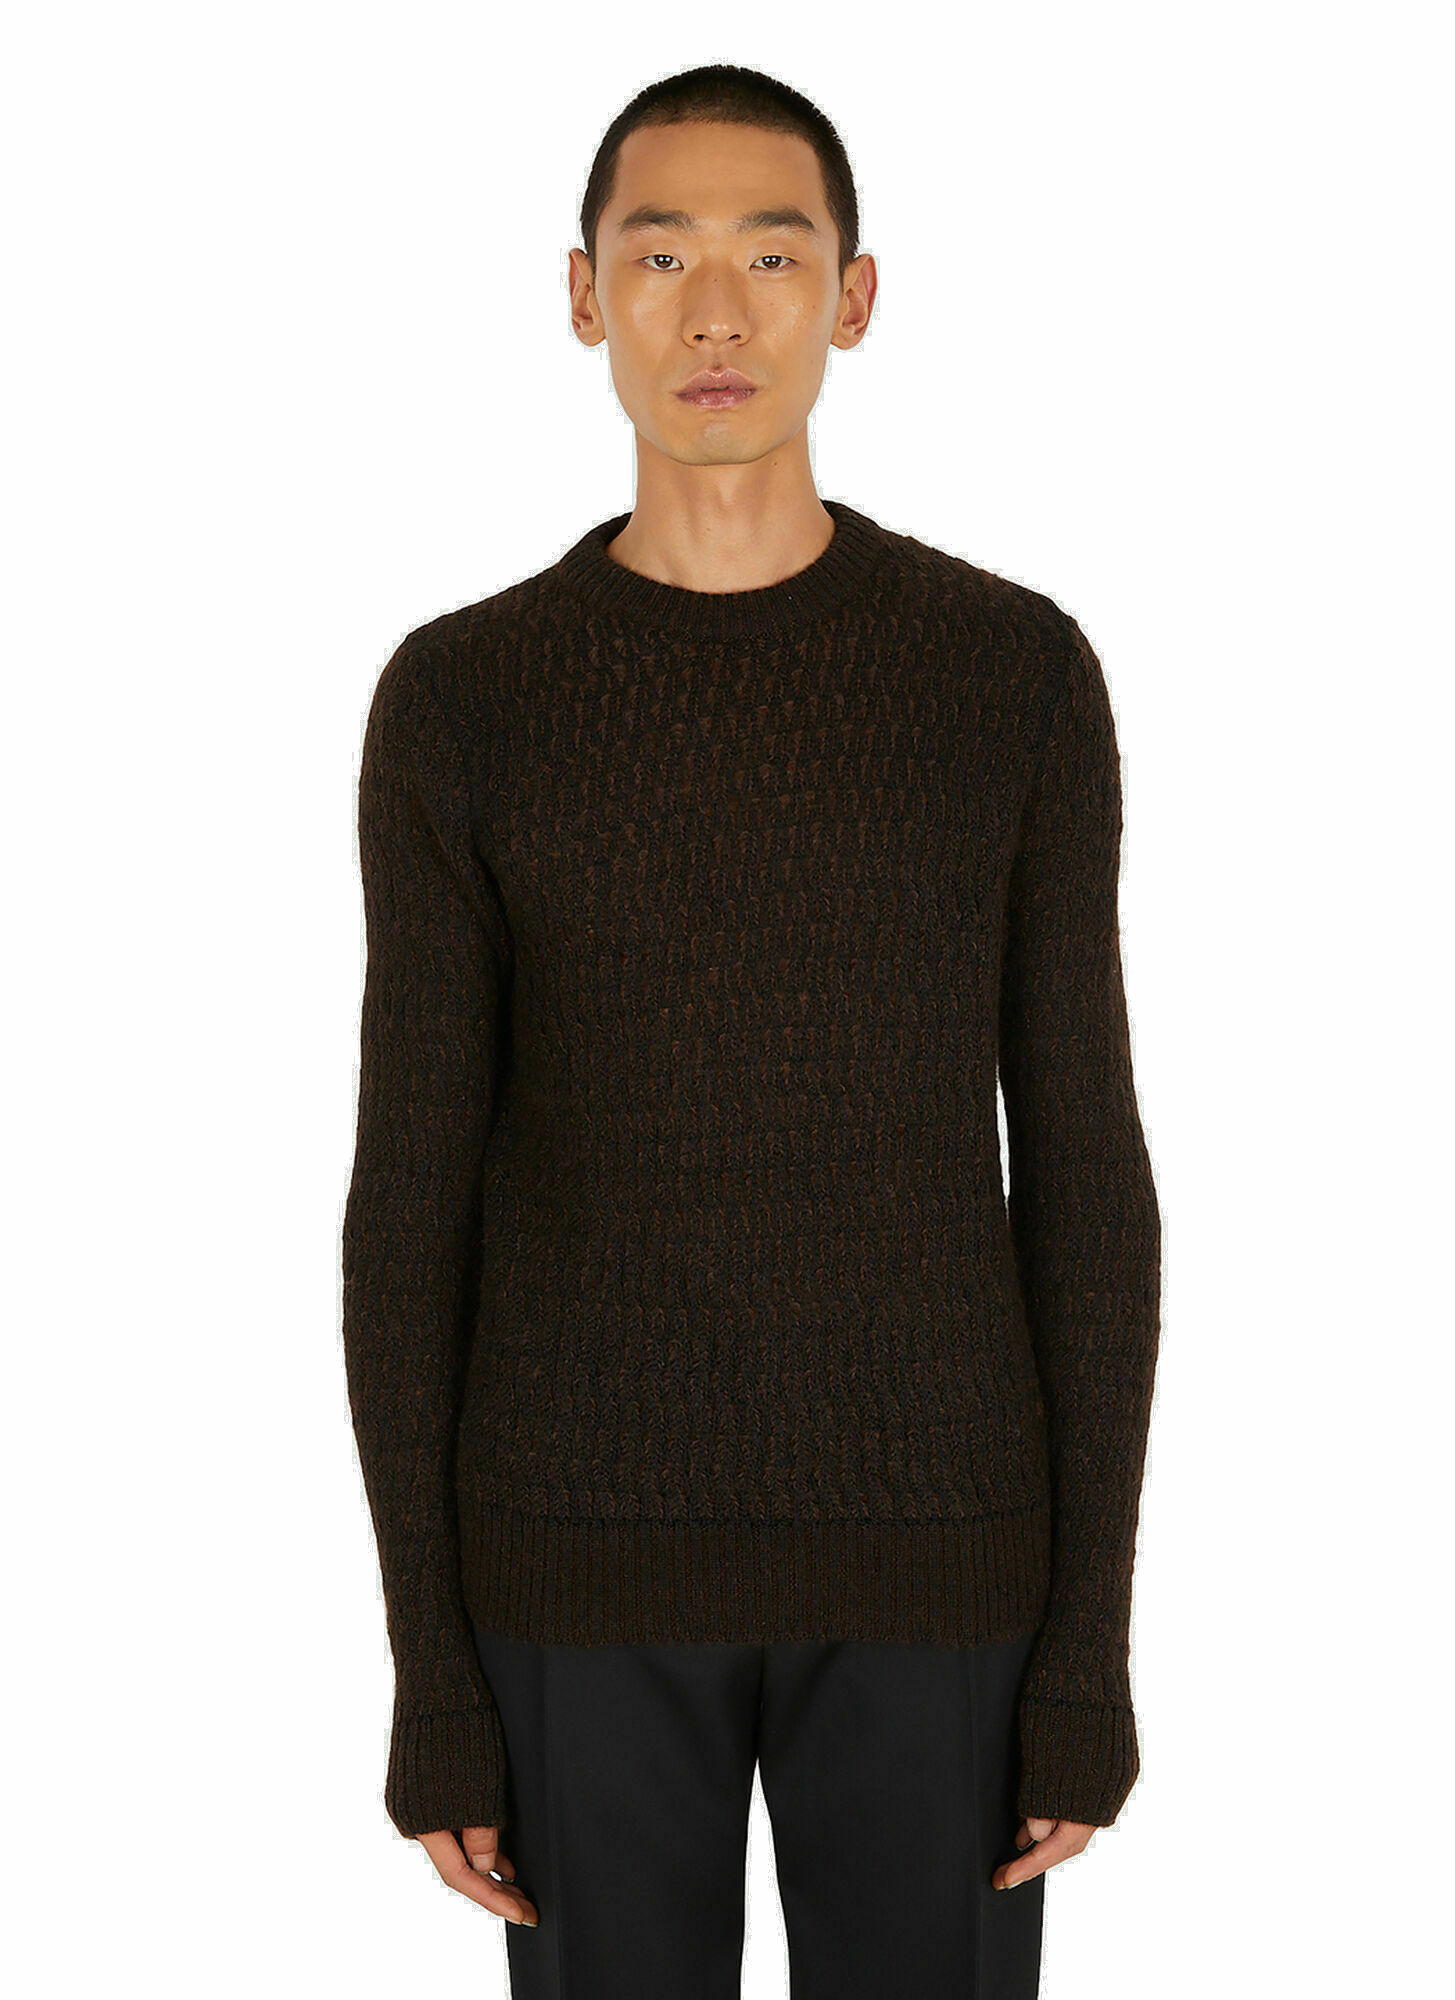 Photo: Lace Effect Sweater in Brown